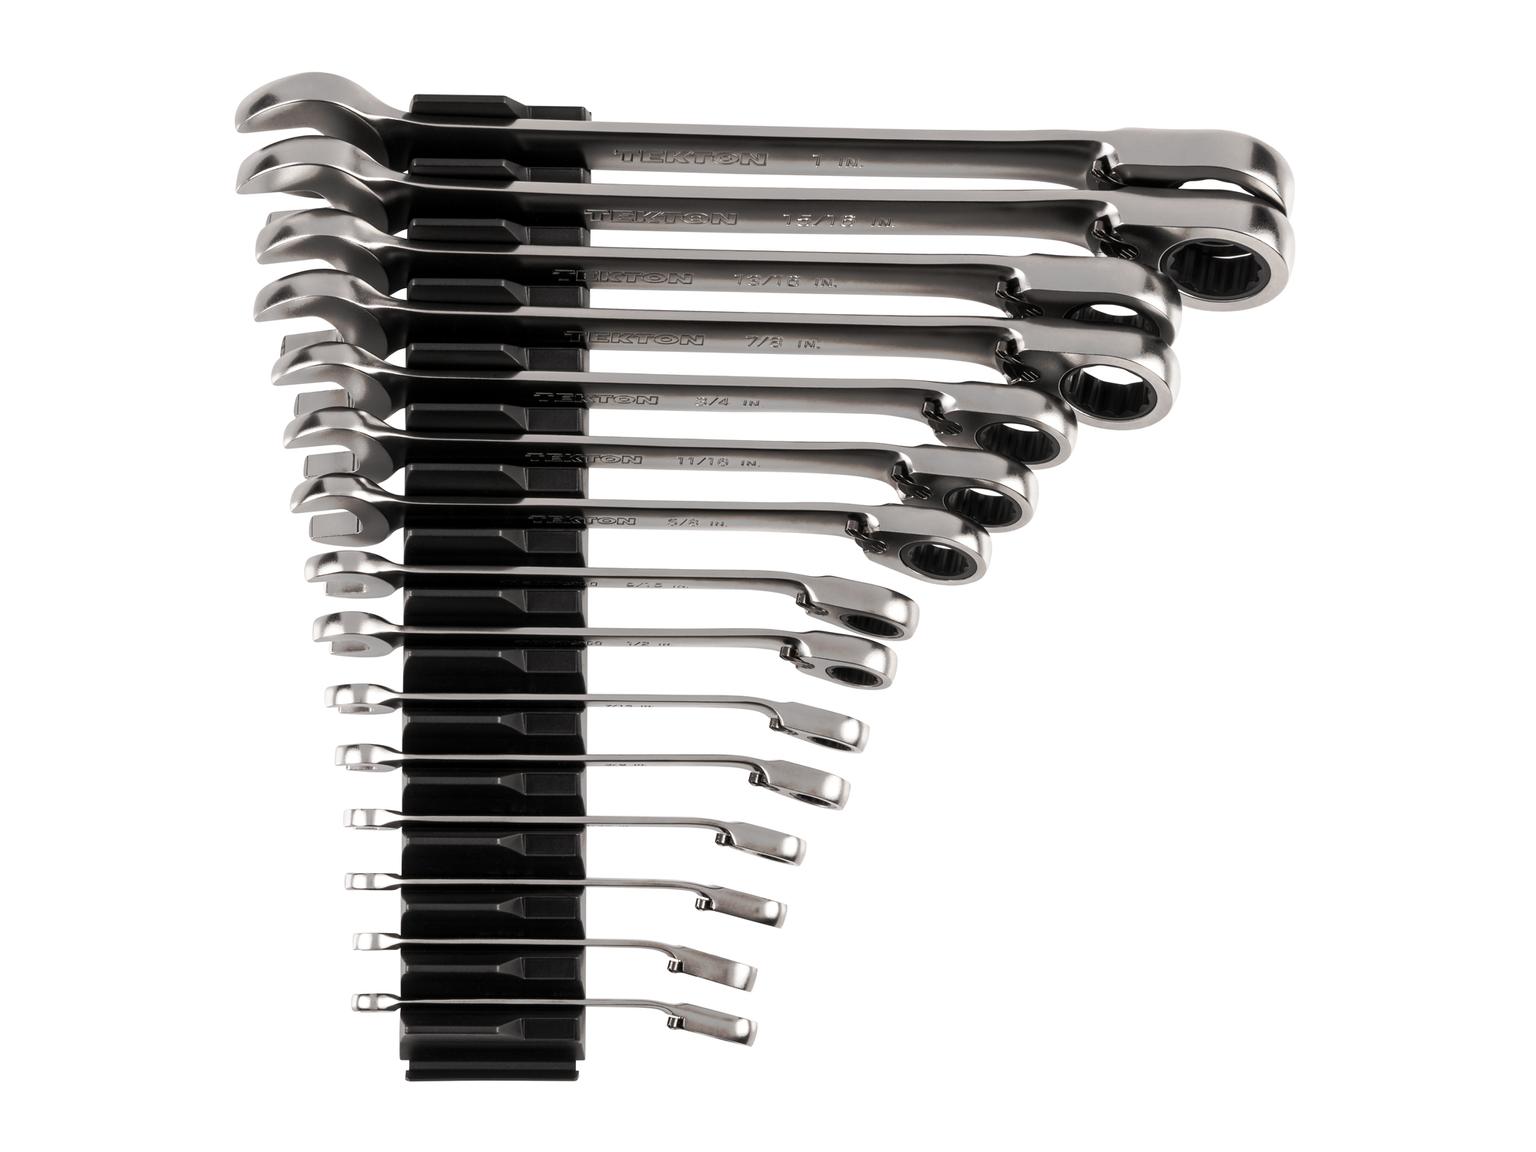 Reversible 12-Point Ratcheting Combination Wrench Set, 15-Piece (Modular Wrench Organizer)